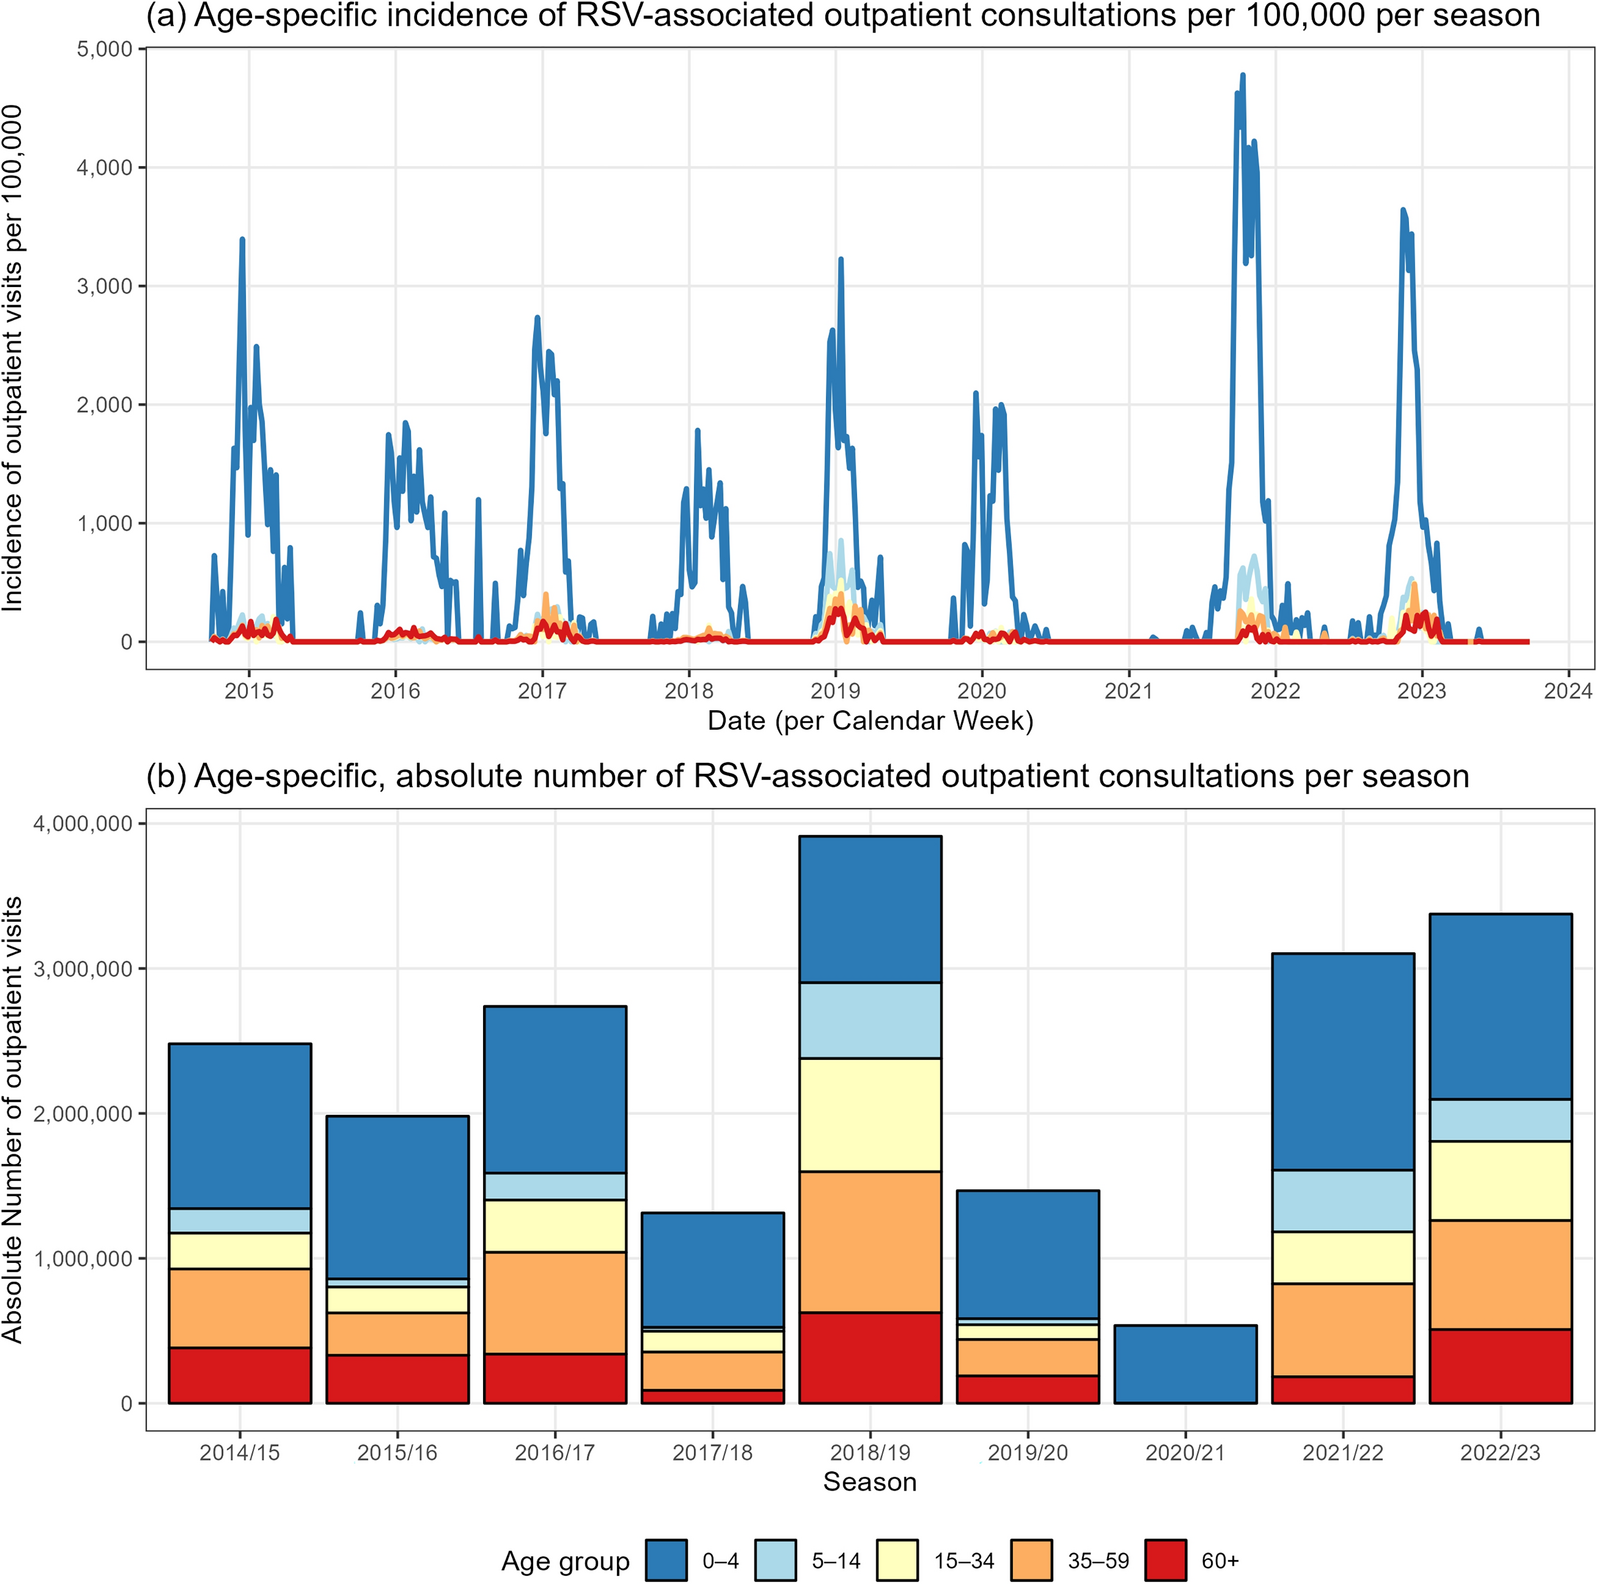 The Burden of Respiratory Syncytial Virus (RSV) in Germany: A Comprehensive Data Analysis Suggests Underdetection of Hospitalisations and Deaths in Adults 60 Years and Older